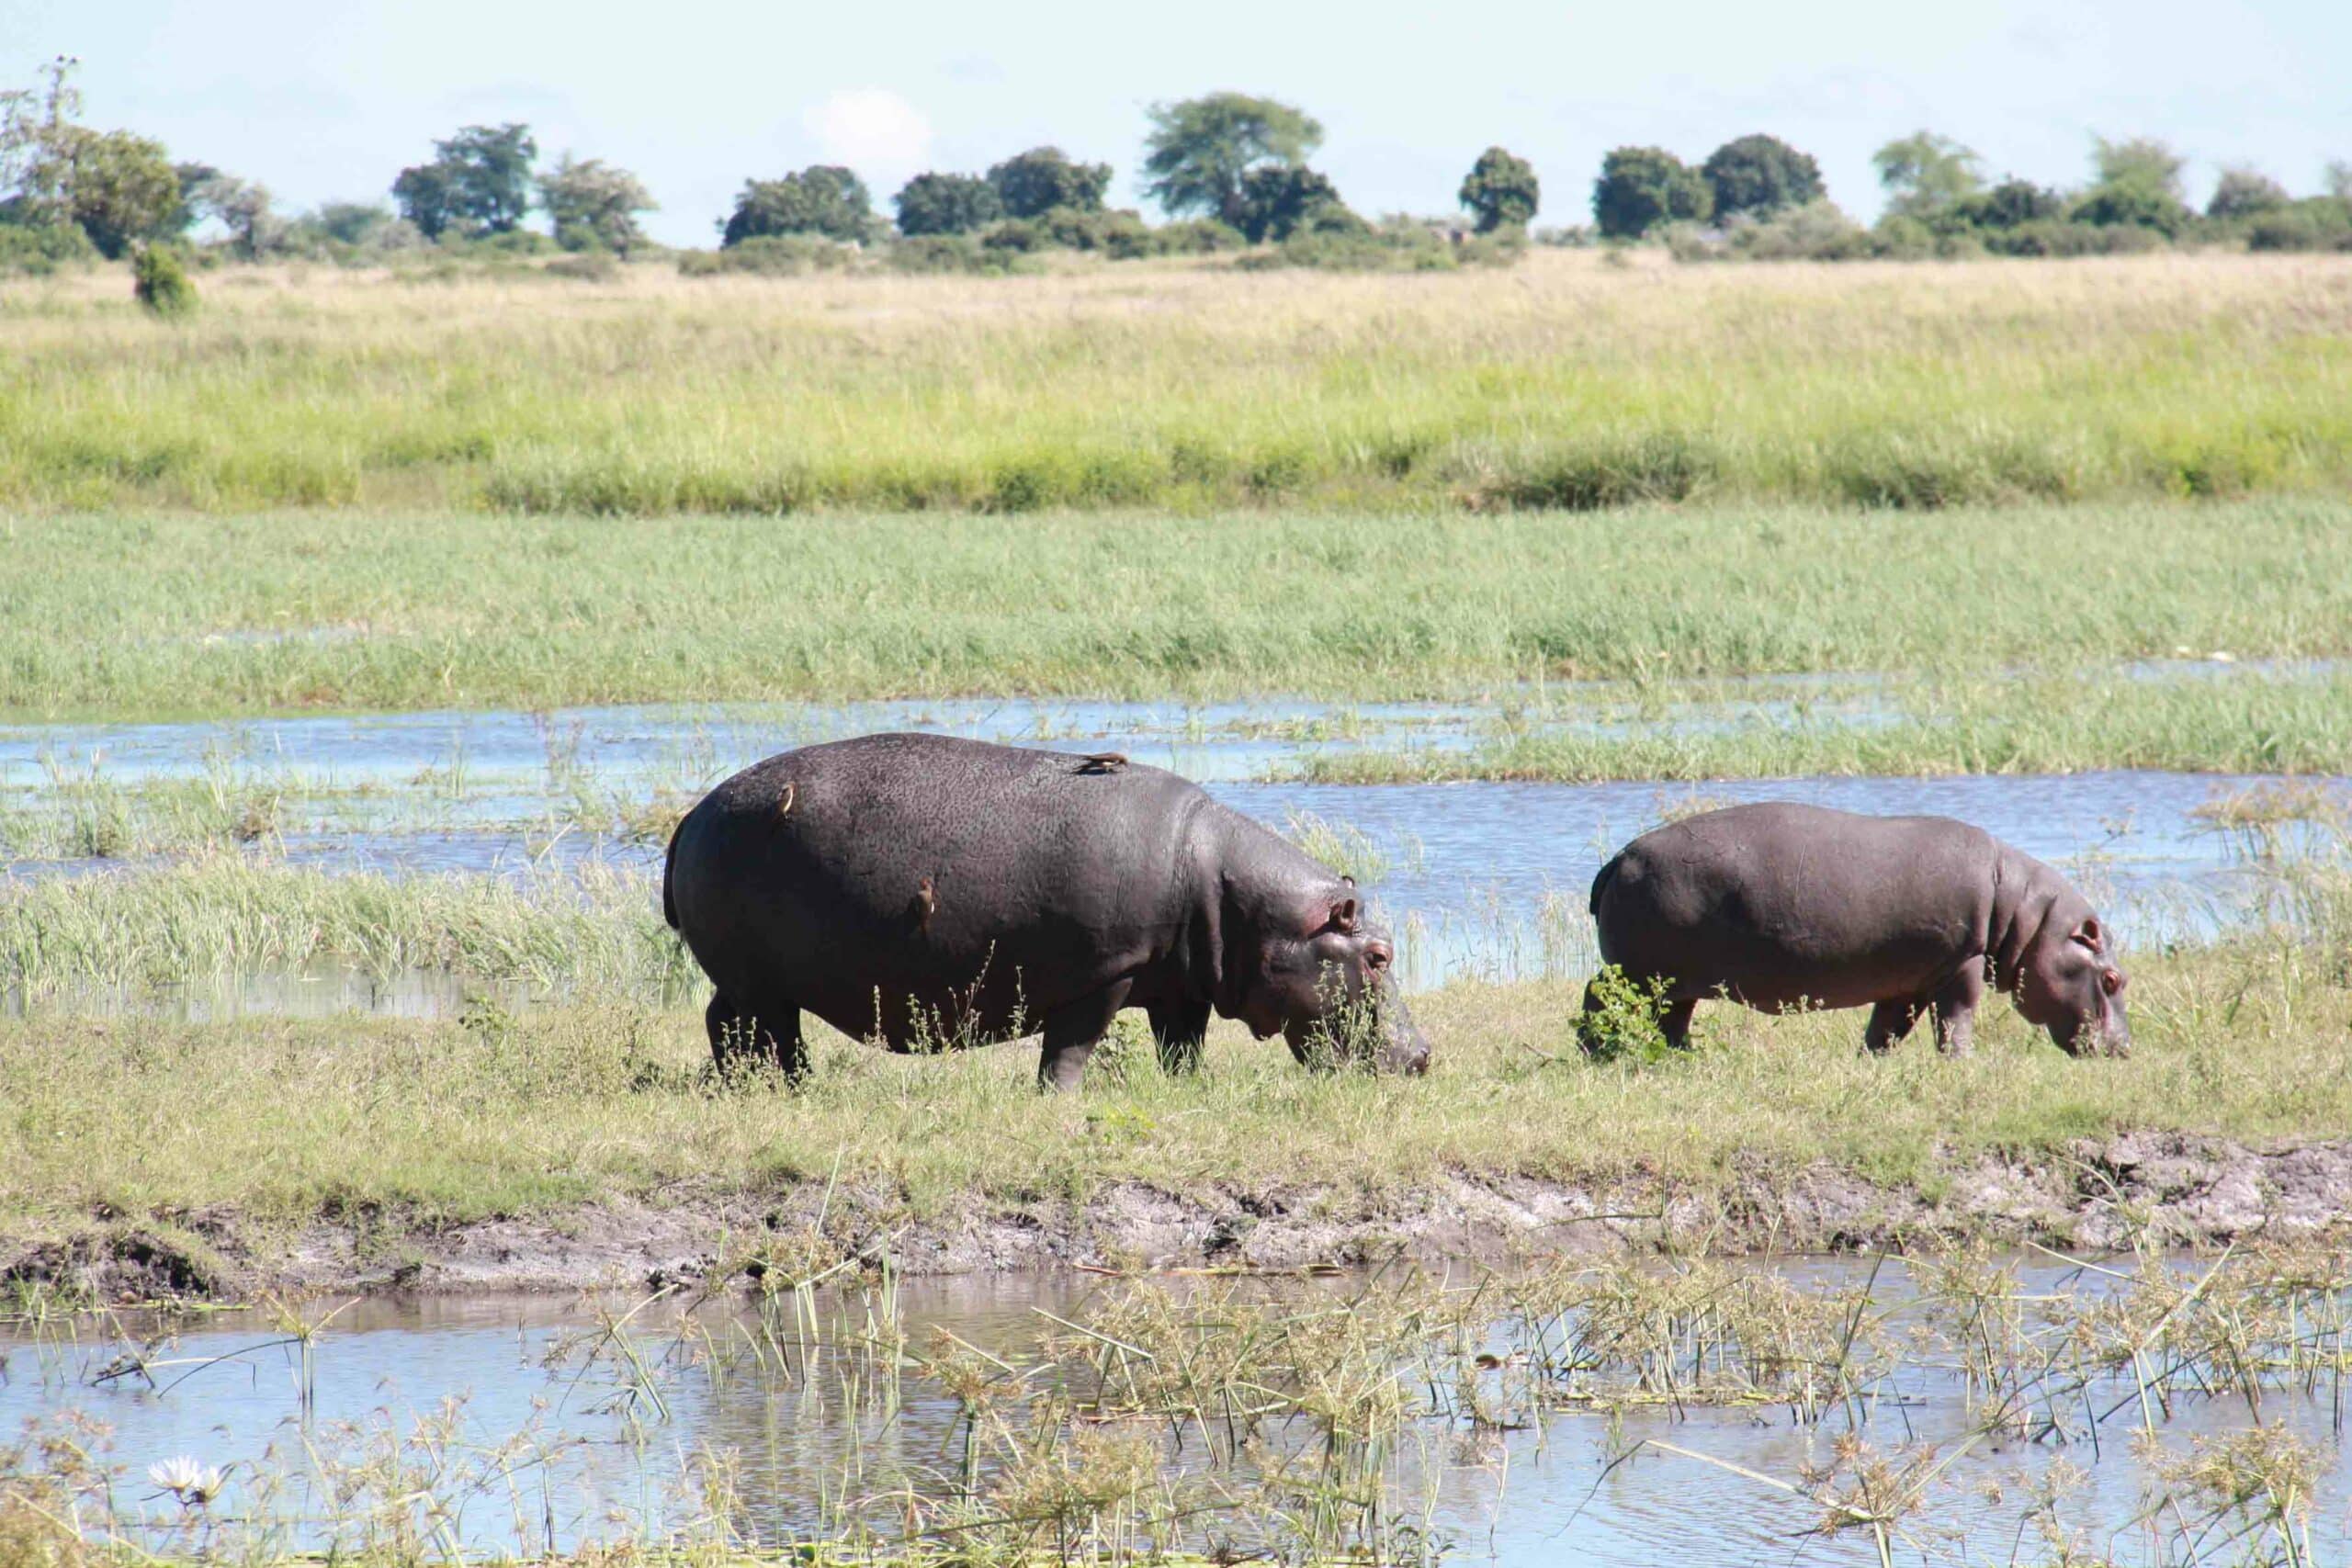 The picture shows two hippos.